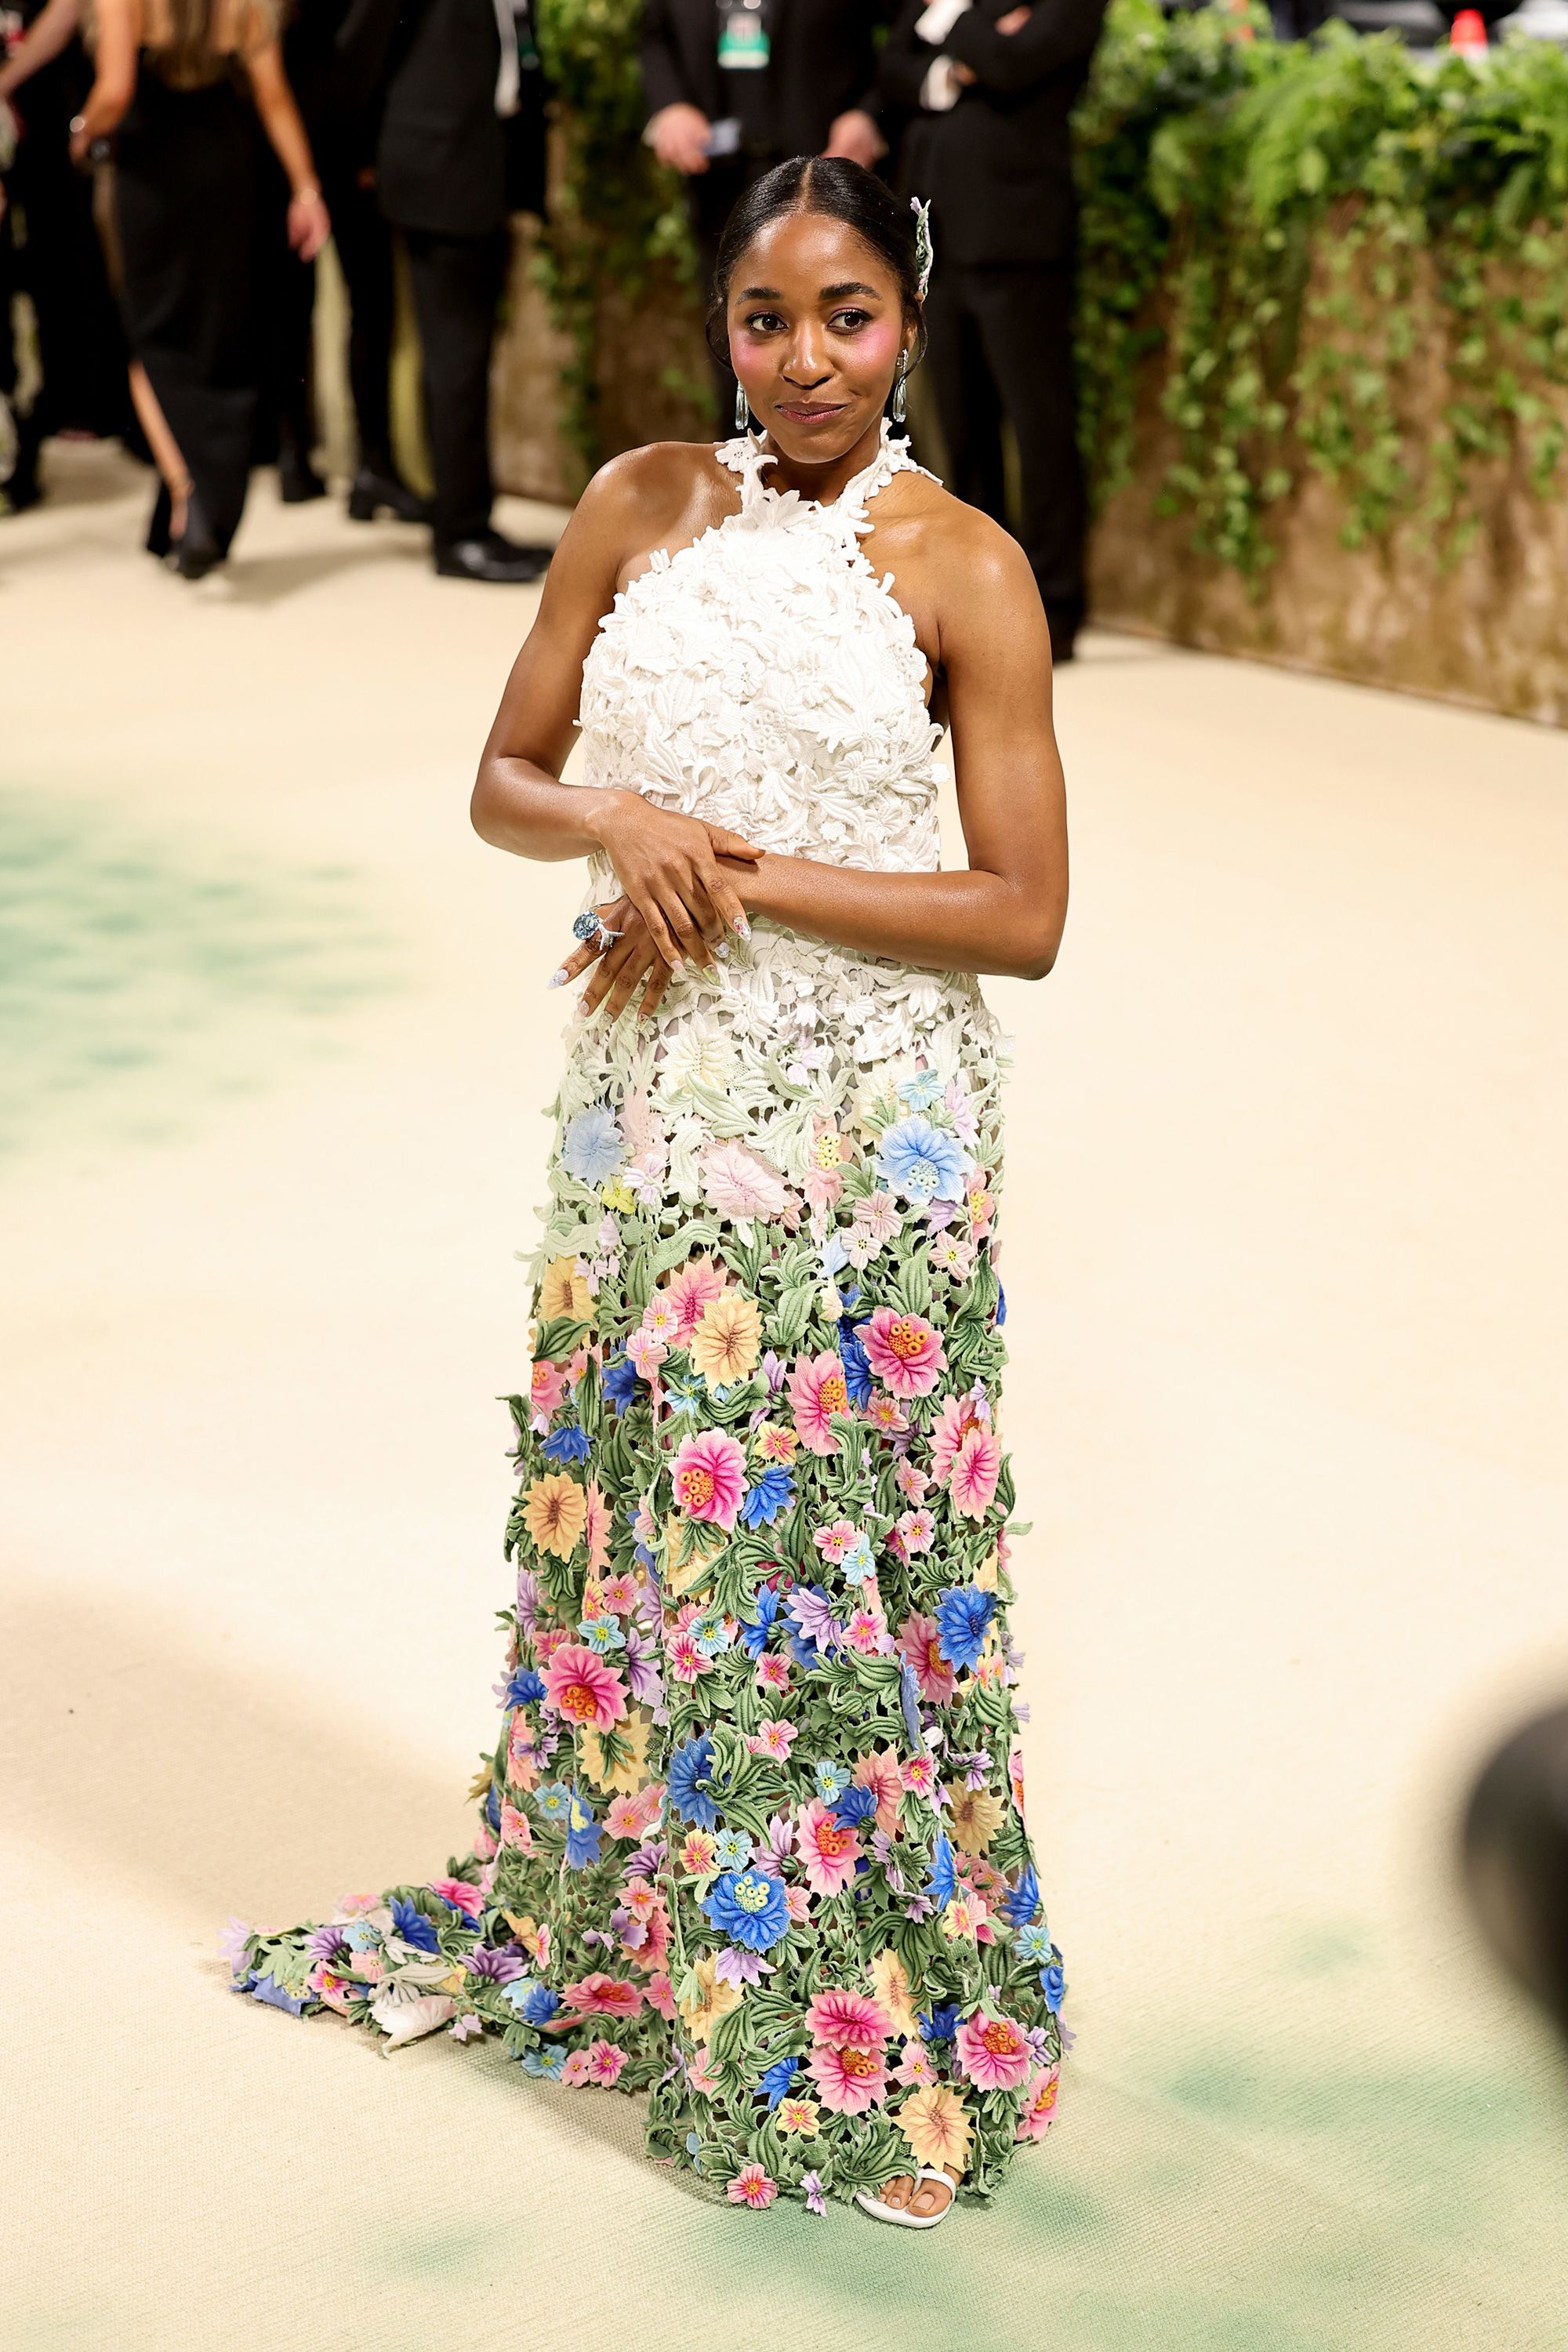 'The Bear' star Ayo Edebiri's custom lace Loewe dress was hand painted and hand embroidered to create an optical illusion of 3D flowers.